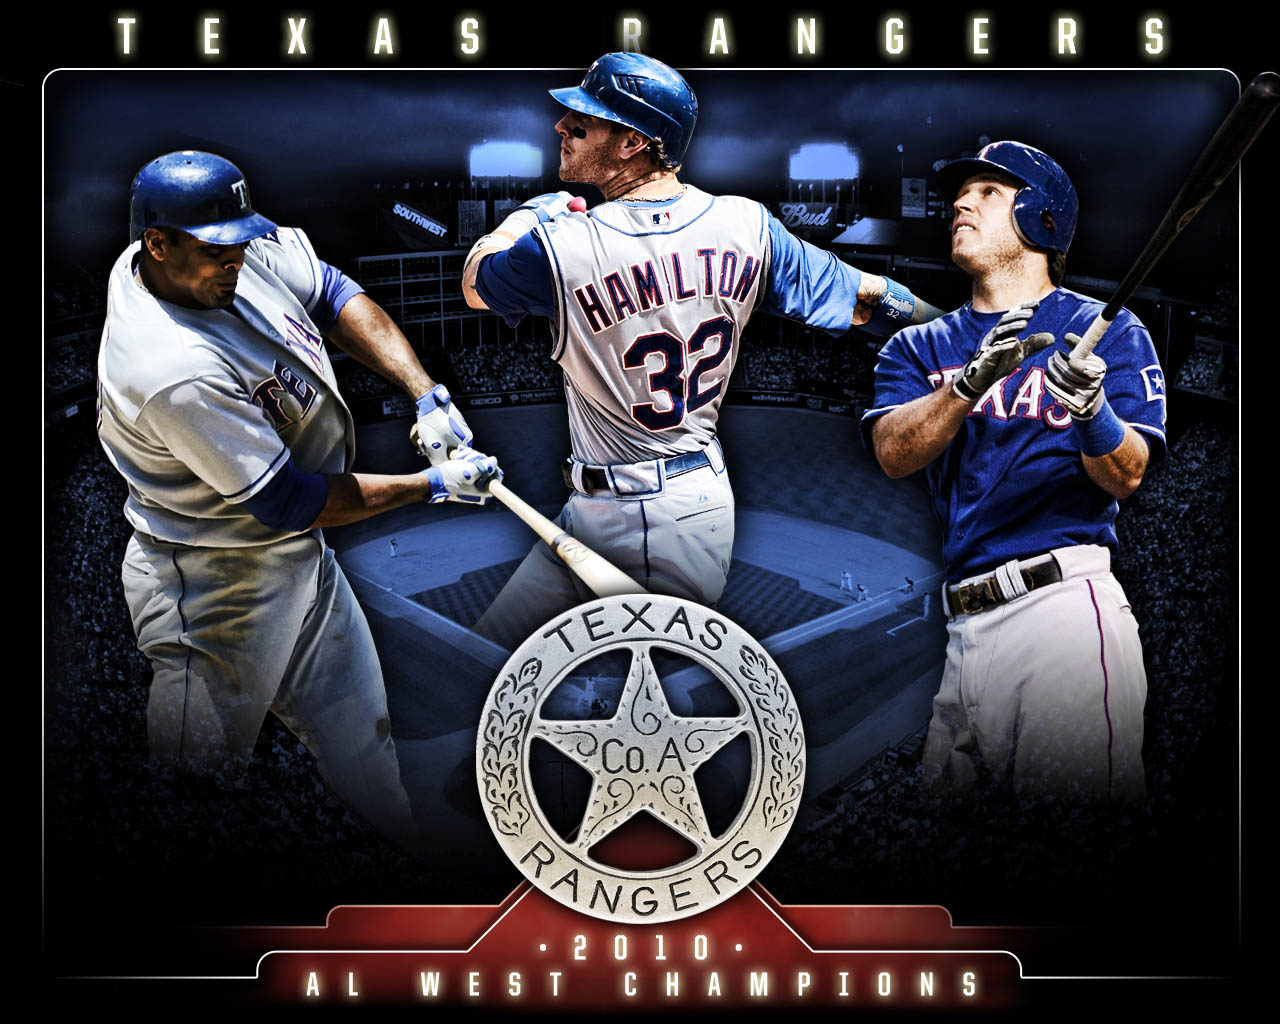 About Texas Rangers Or Even Videos Related To